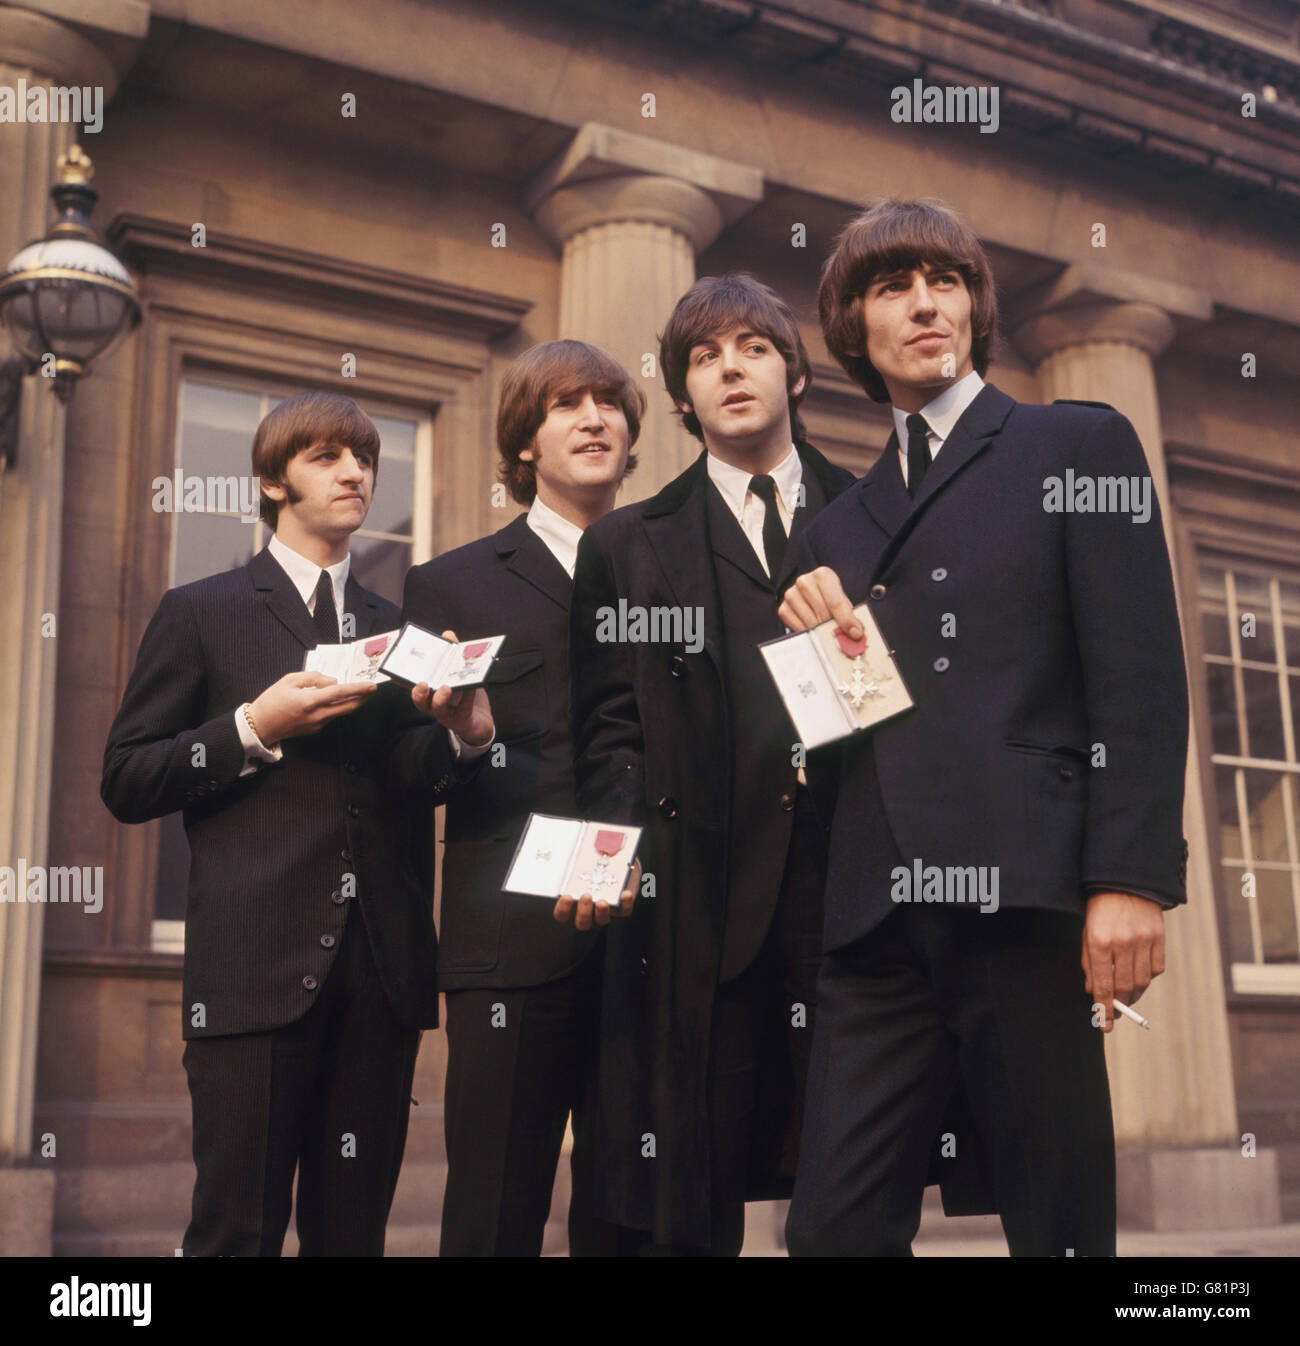 The Beatles showing their MBE Insignias in forecourt after receiving them from the Queen. L-R Ringo Starr, John Lennon, Paul McCartney and George Harrison. Stock Photo